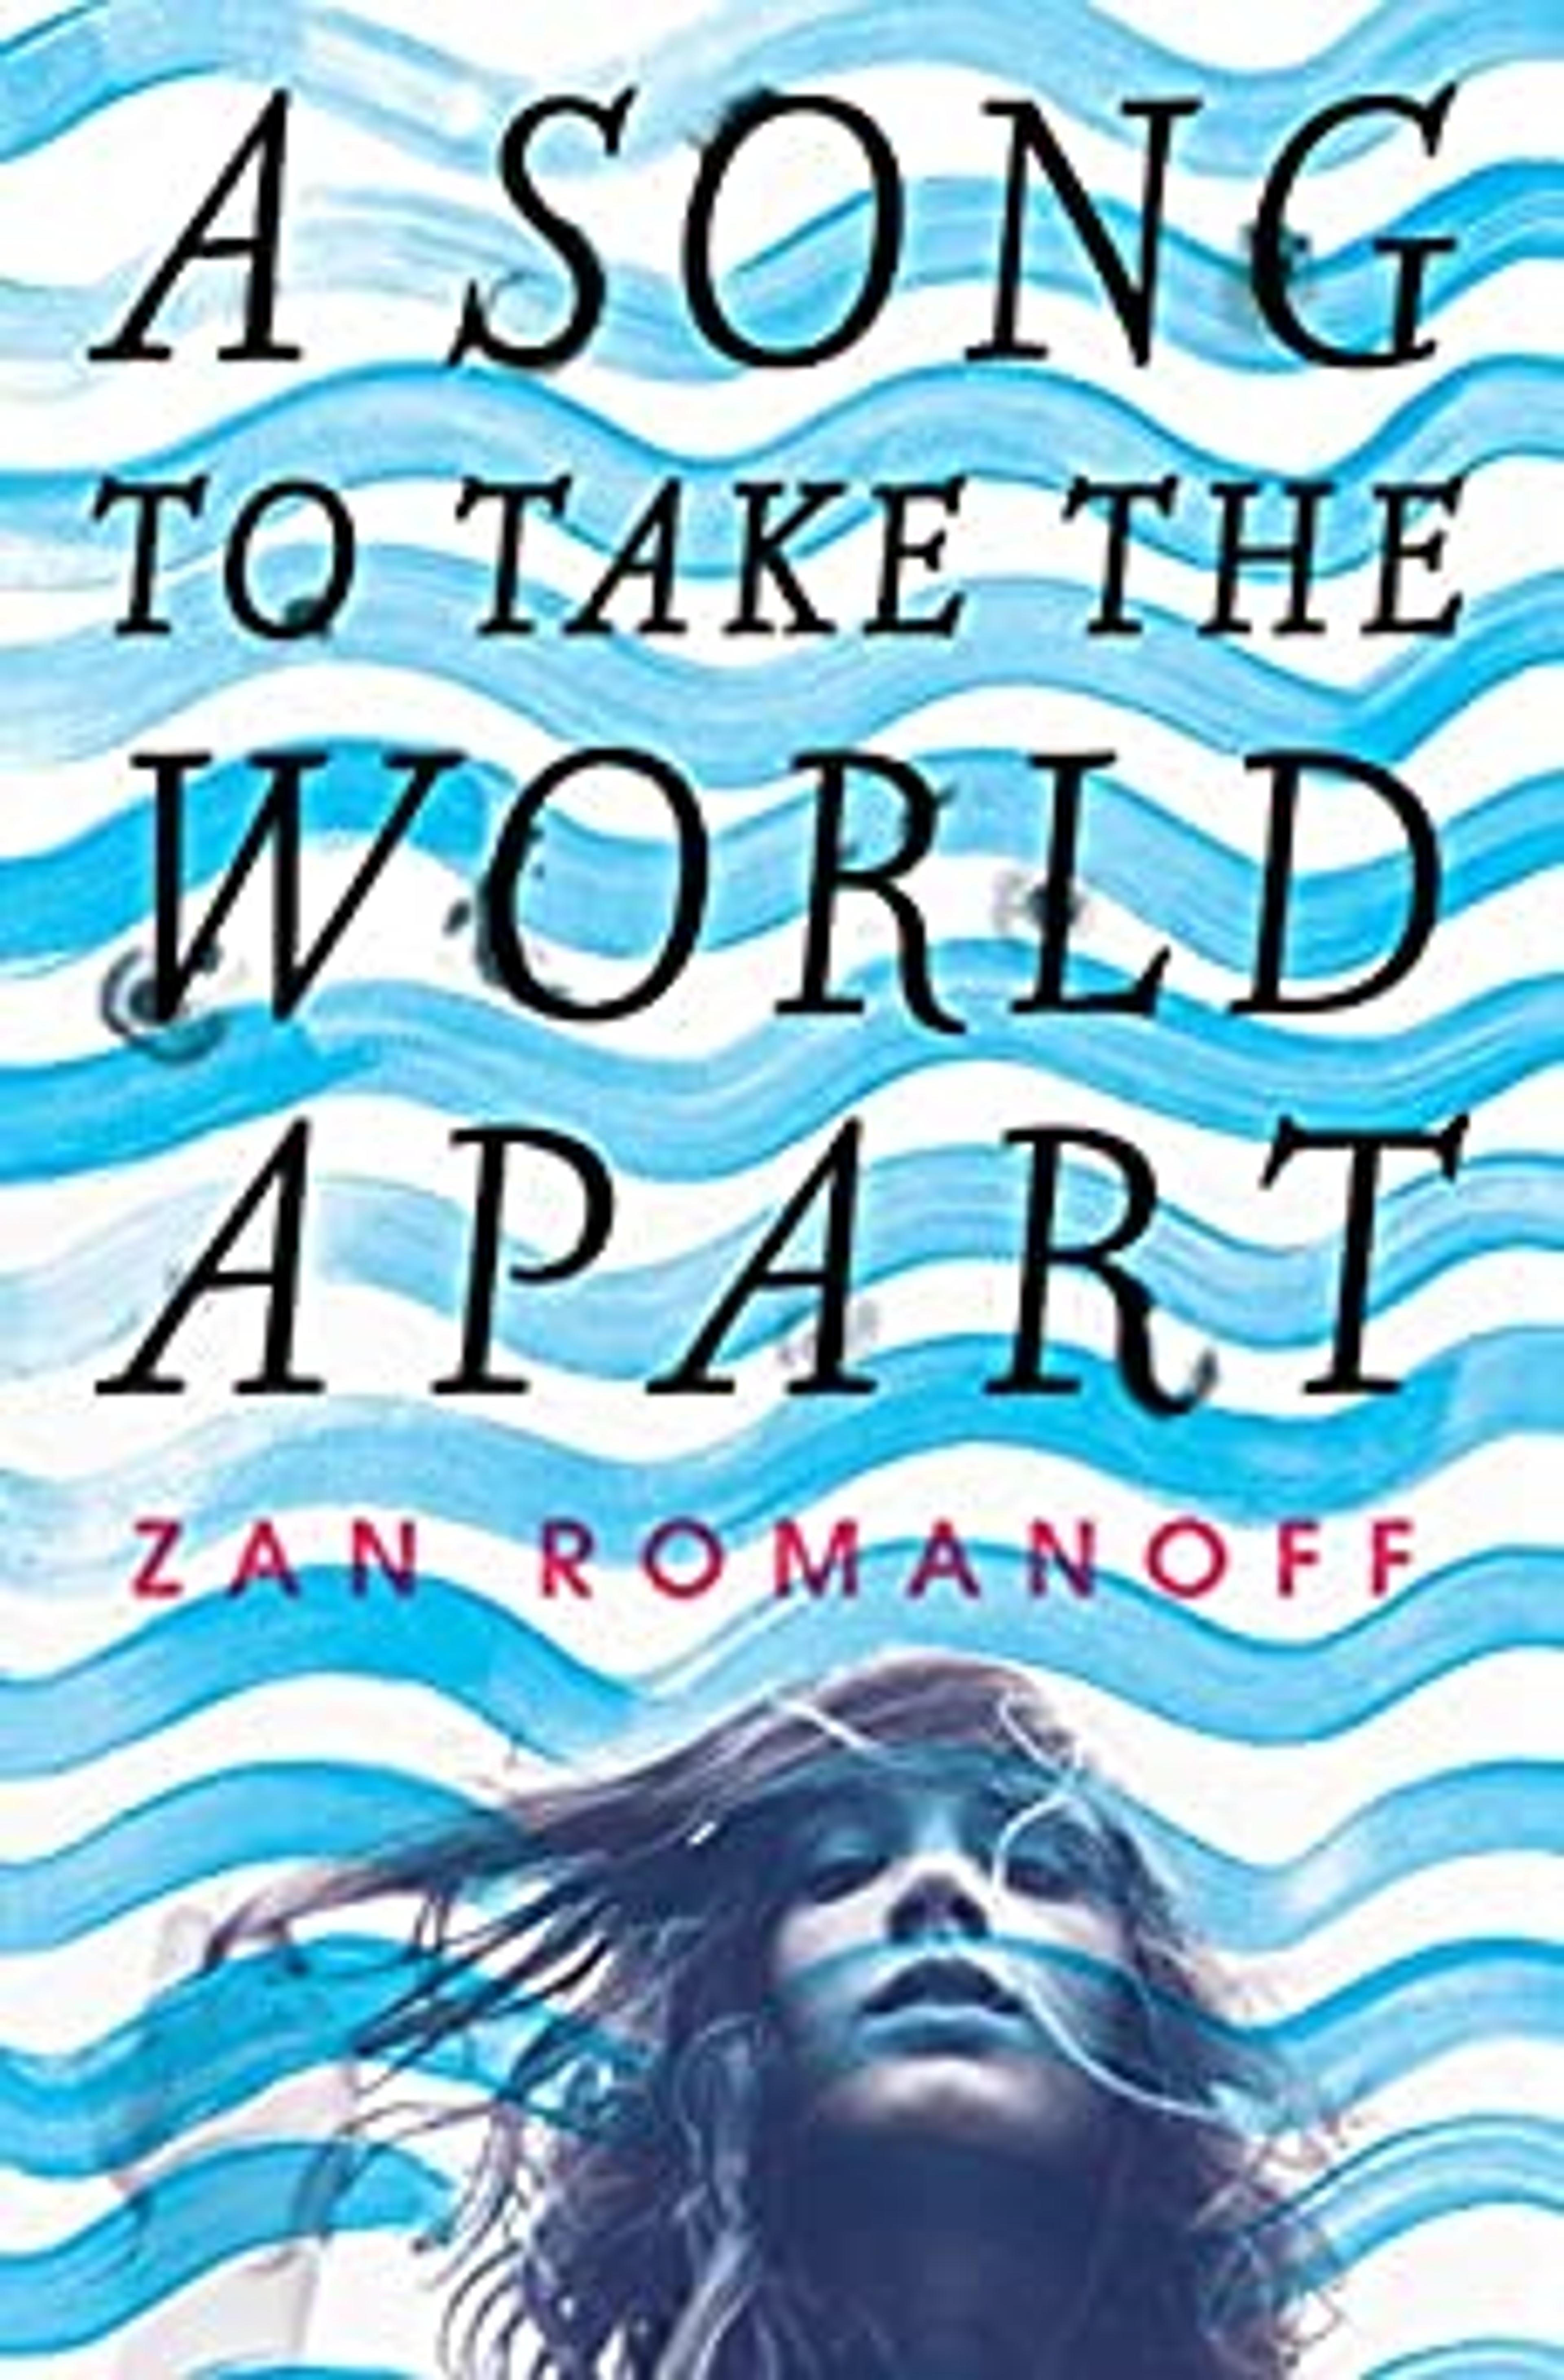 A Song to Take the World Apart book by Zan Romanoff